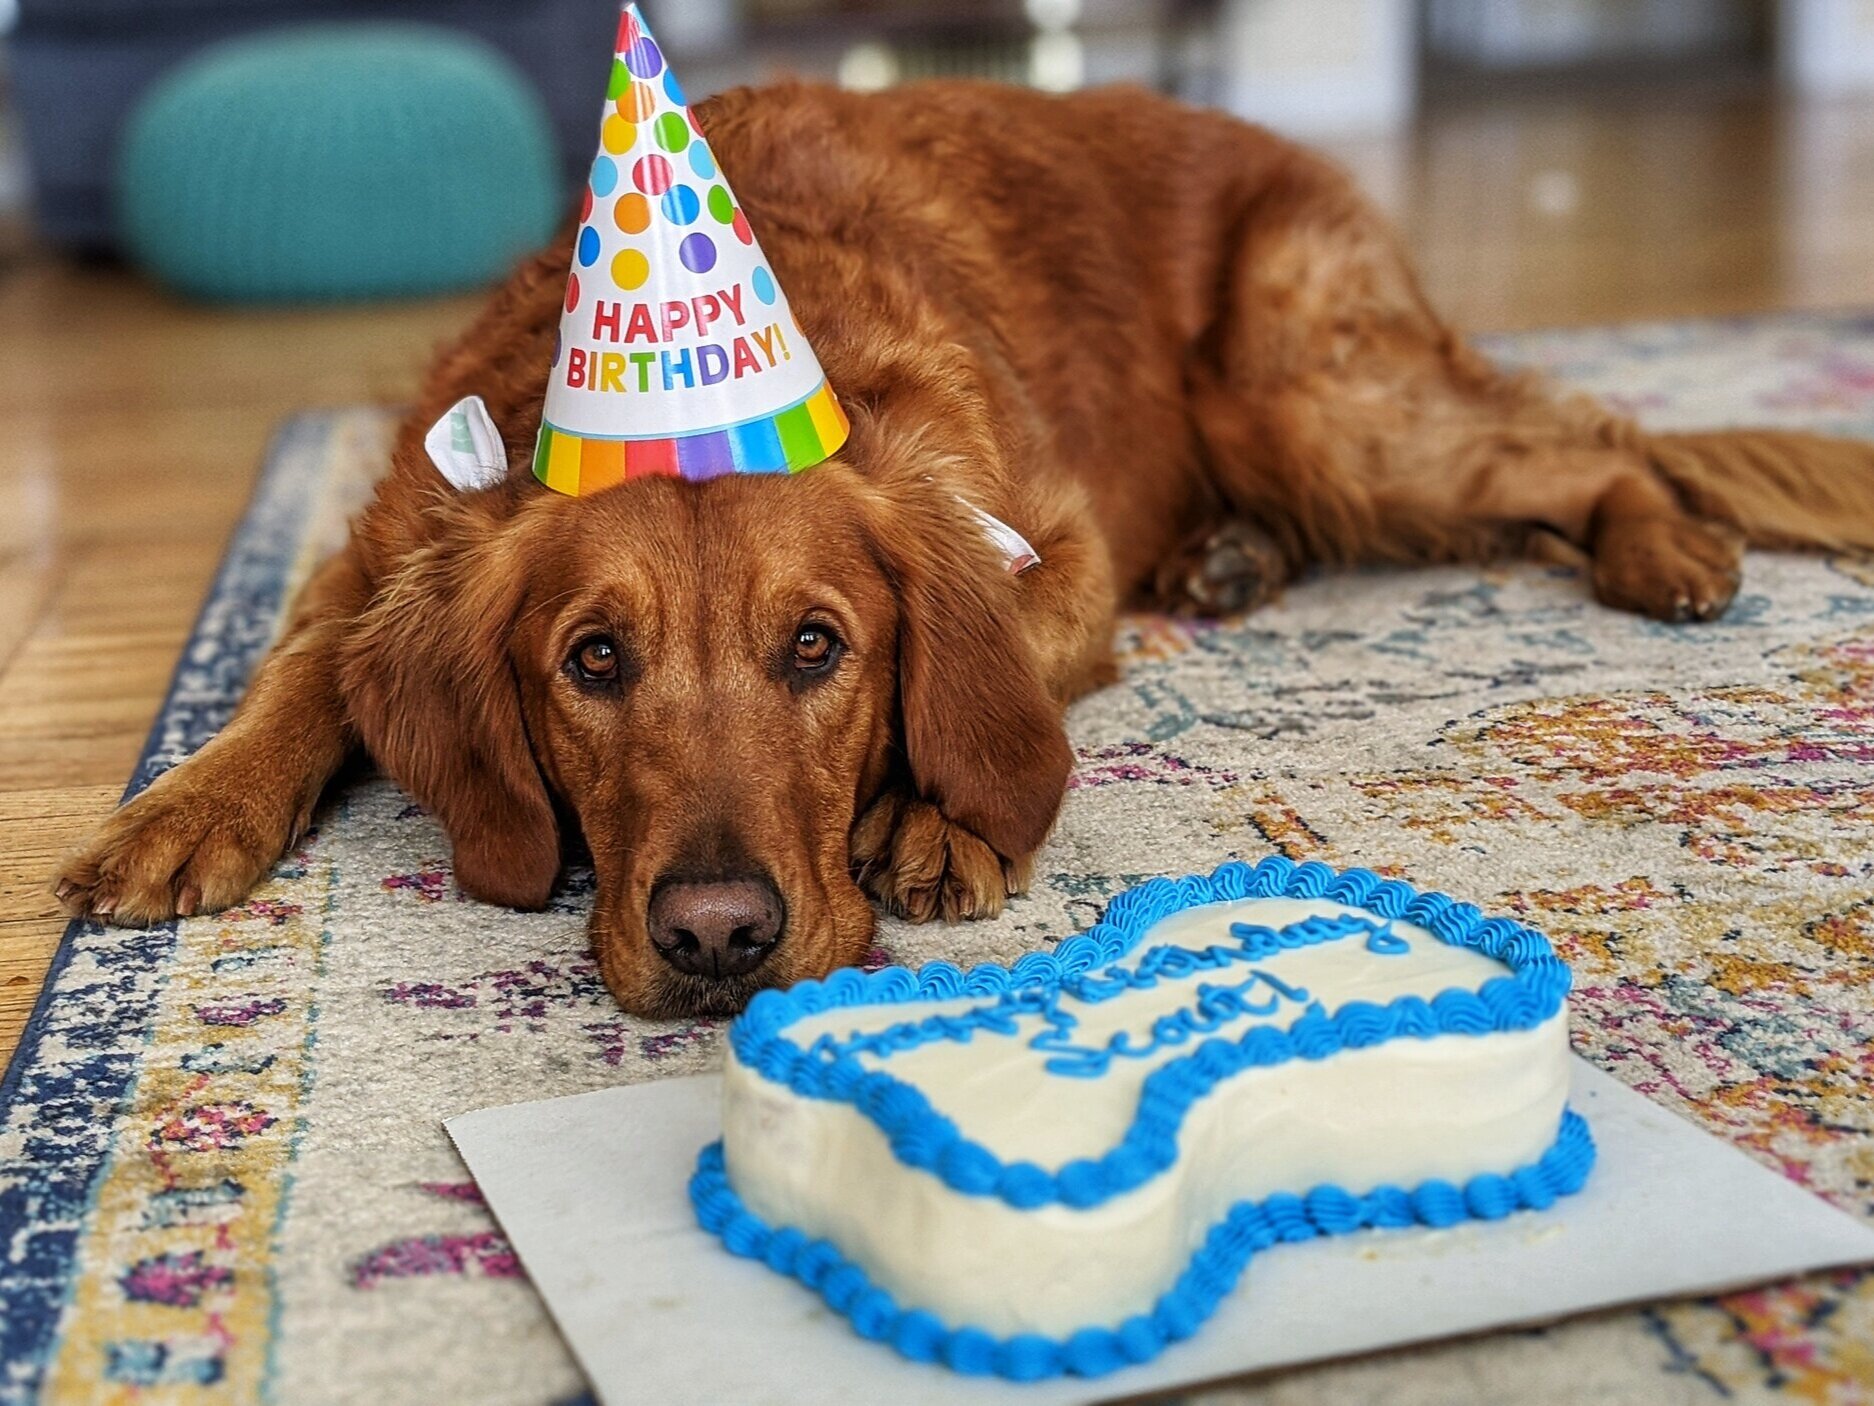 Golden retriever Scout wears a birthday party hat and lays behind a bone shaped birthday cake